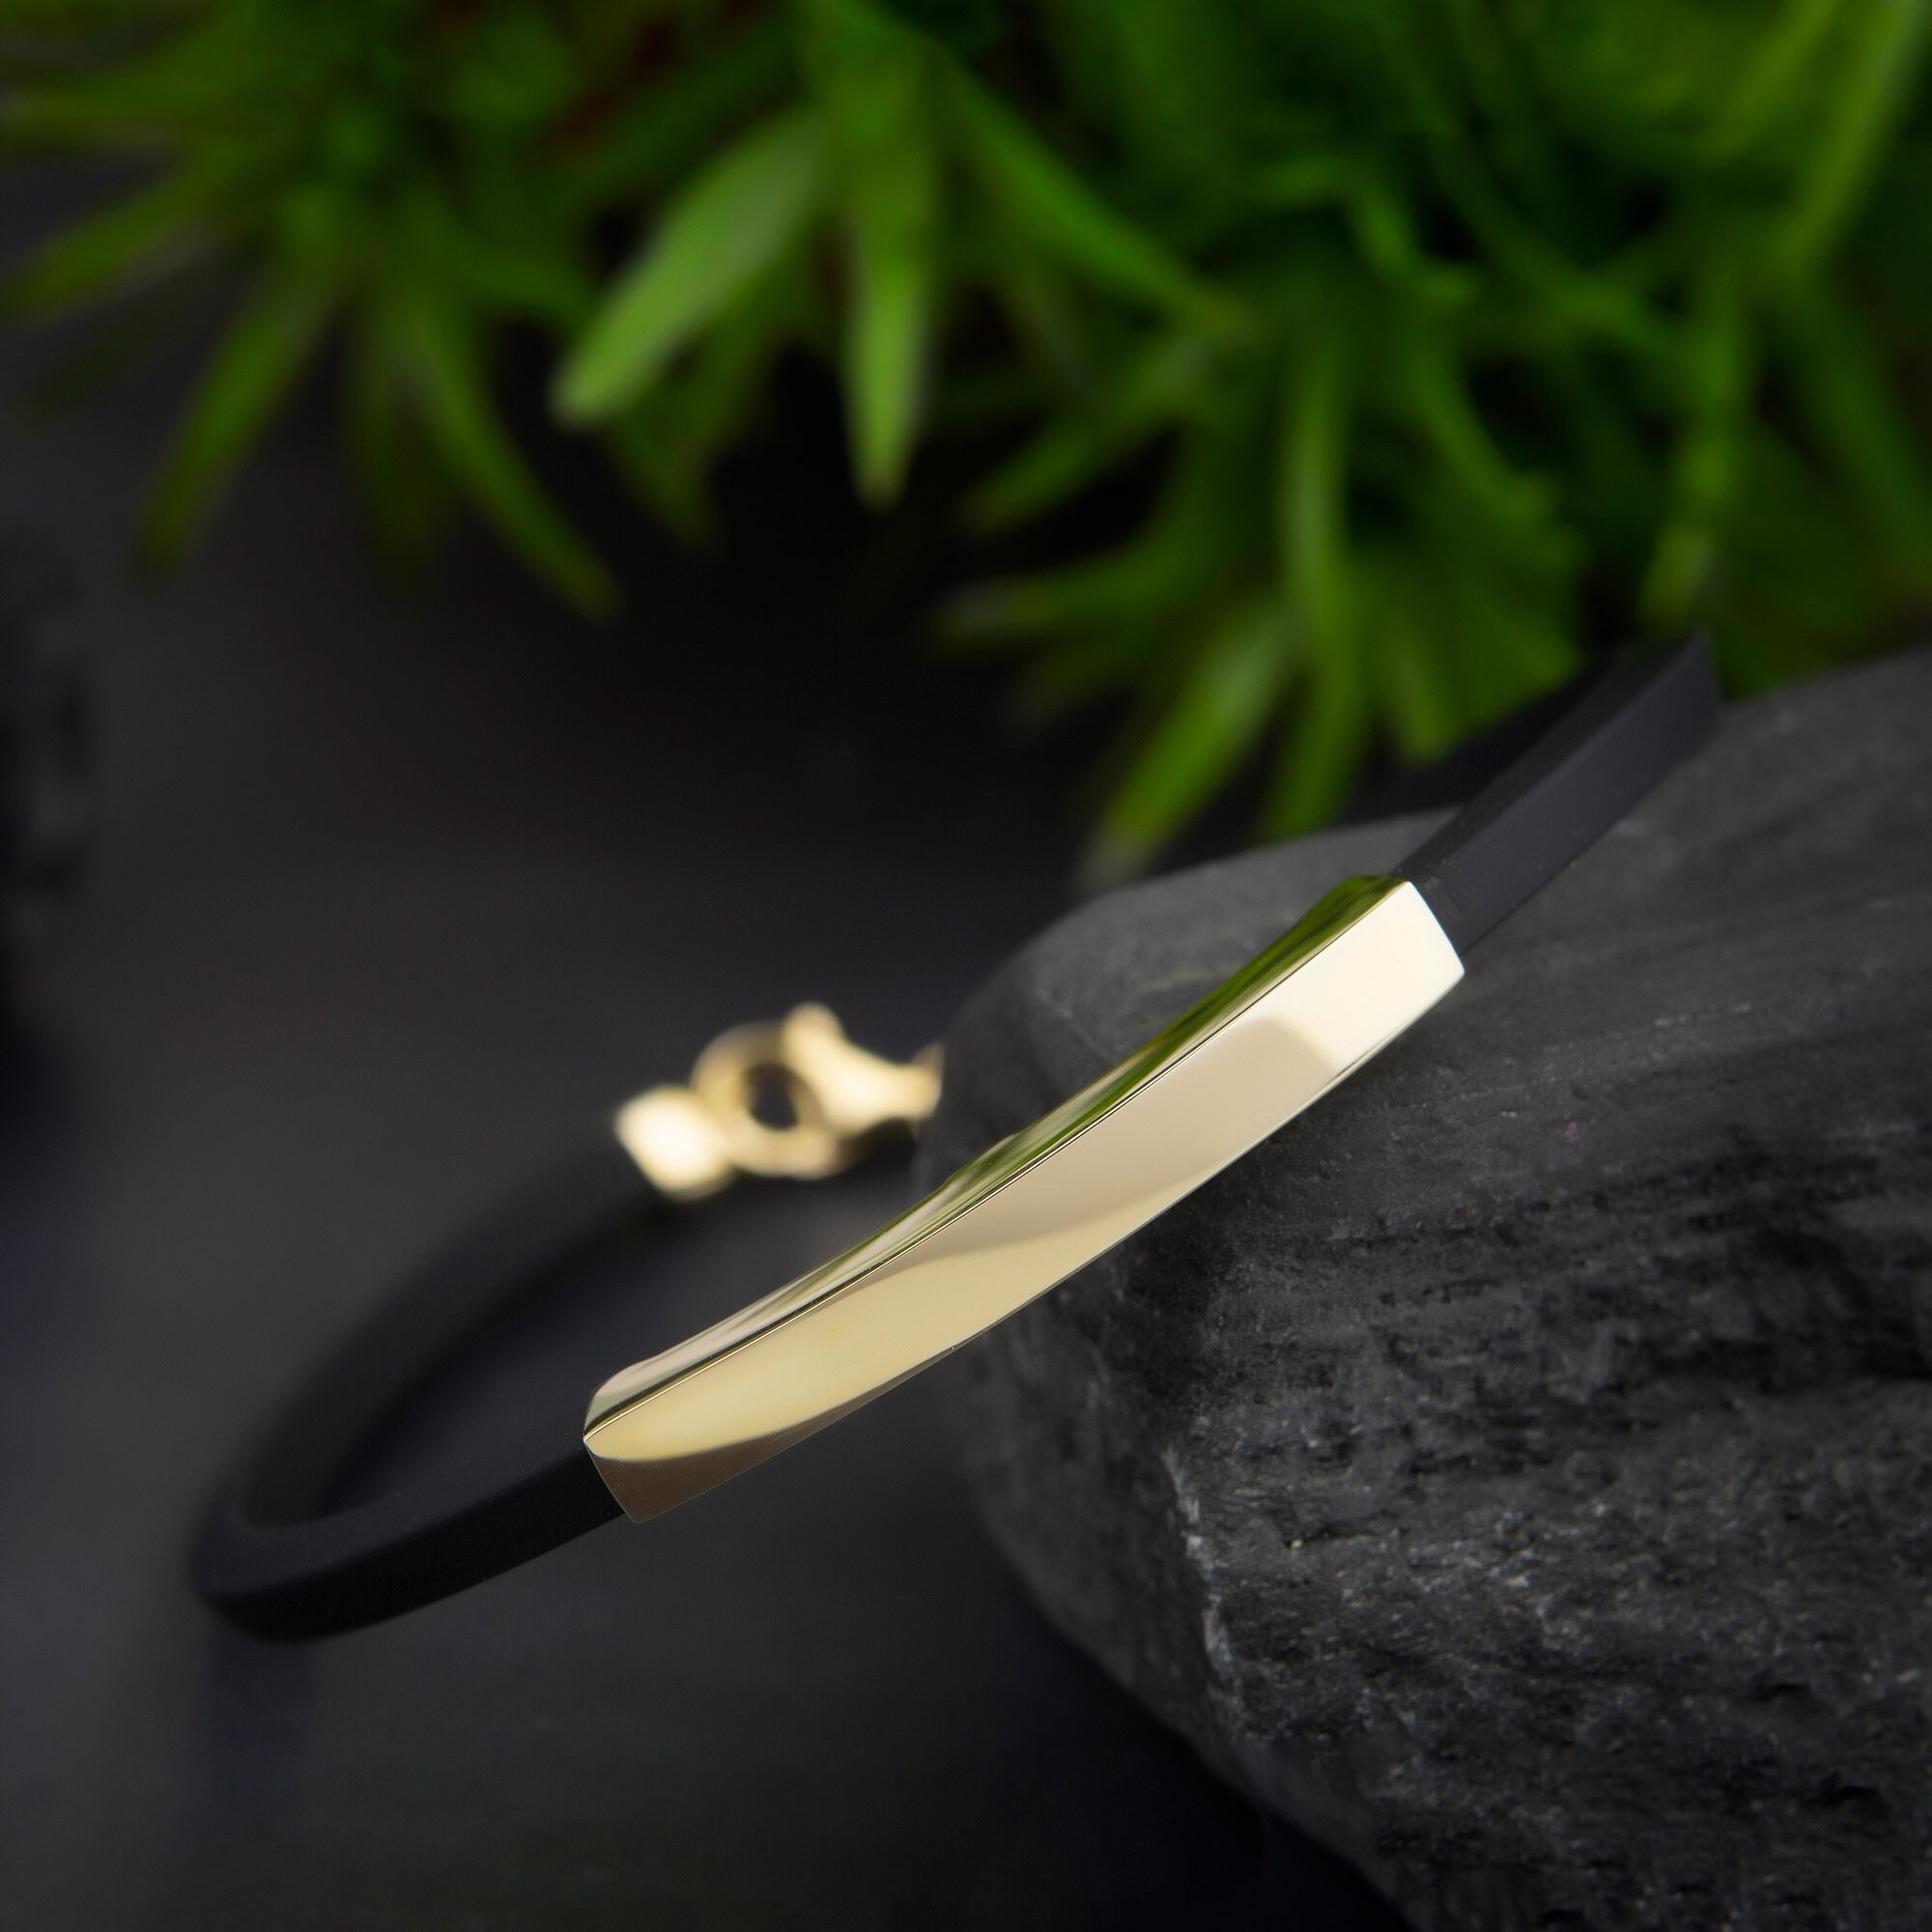 Jonc men bracelet small size gold Gold plated - Creations for Men Jewellery  - Création Gas Bijoux